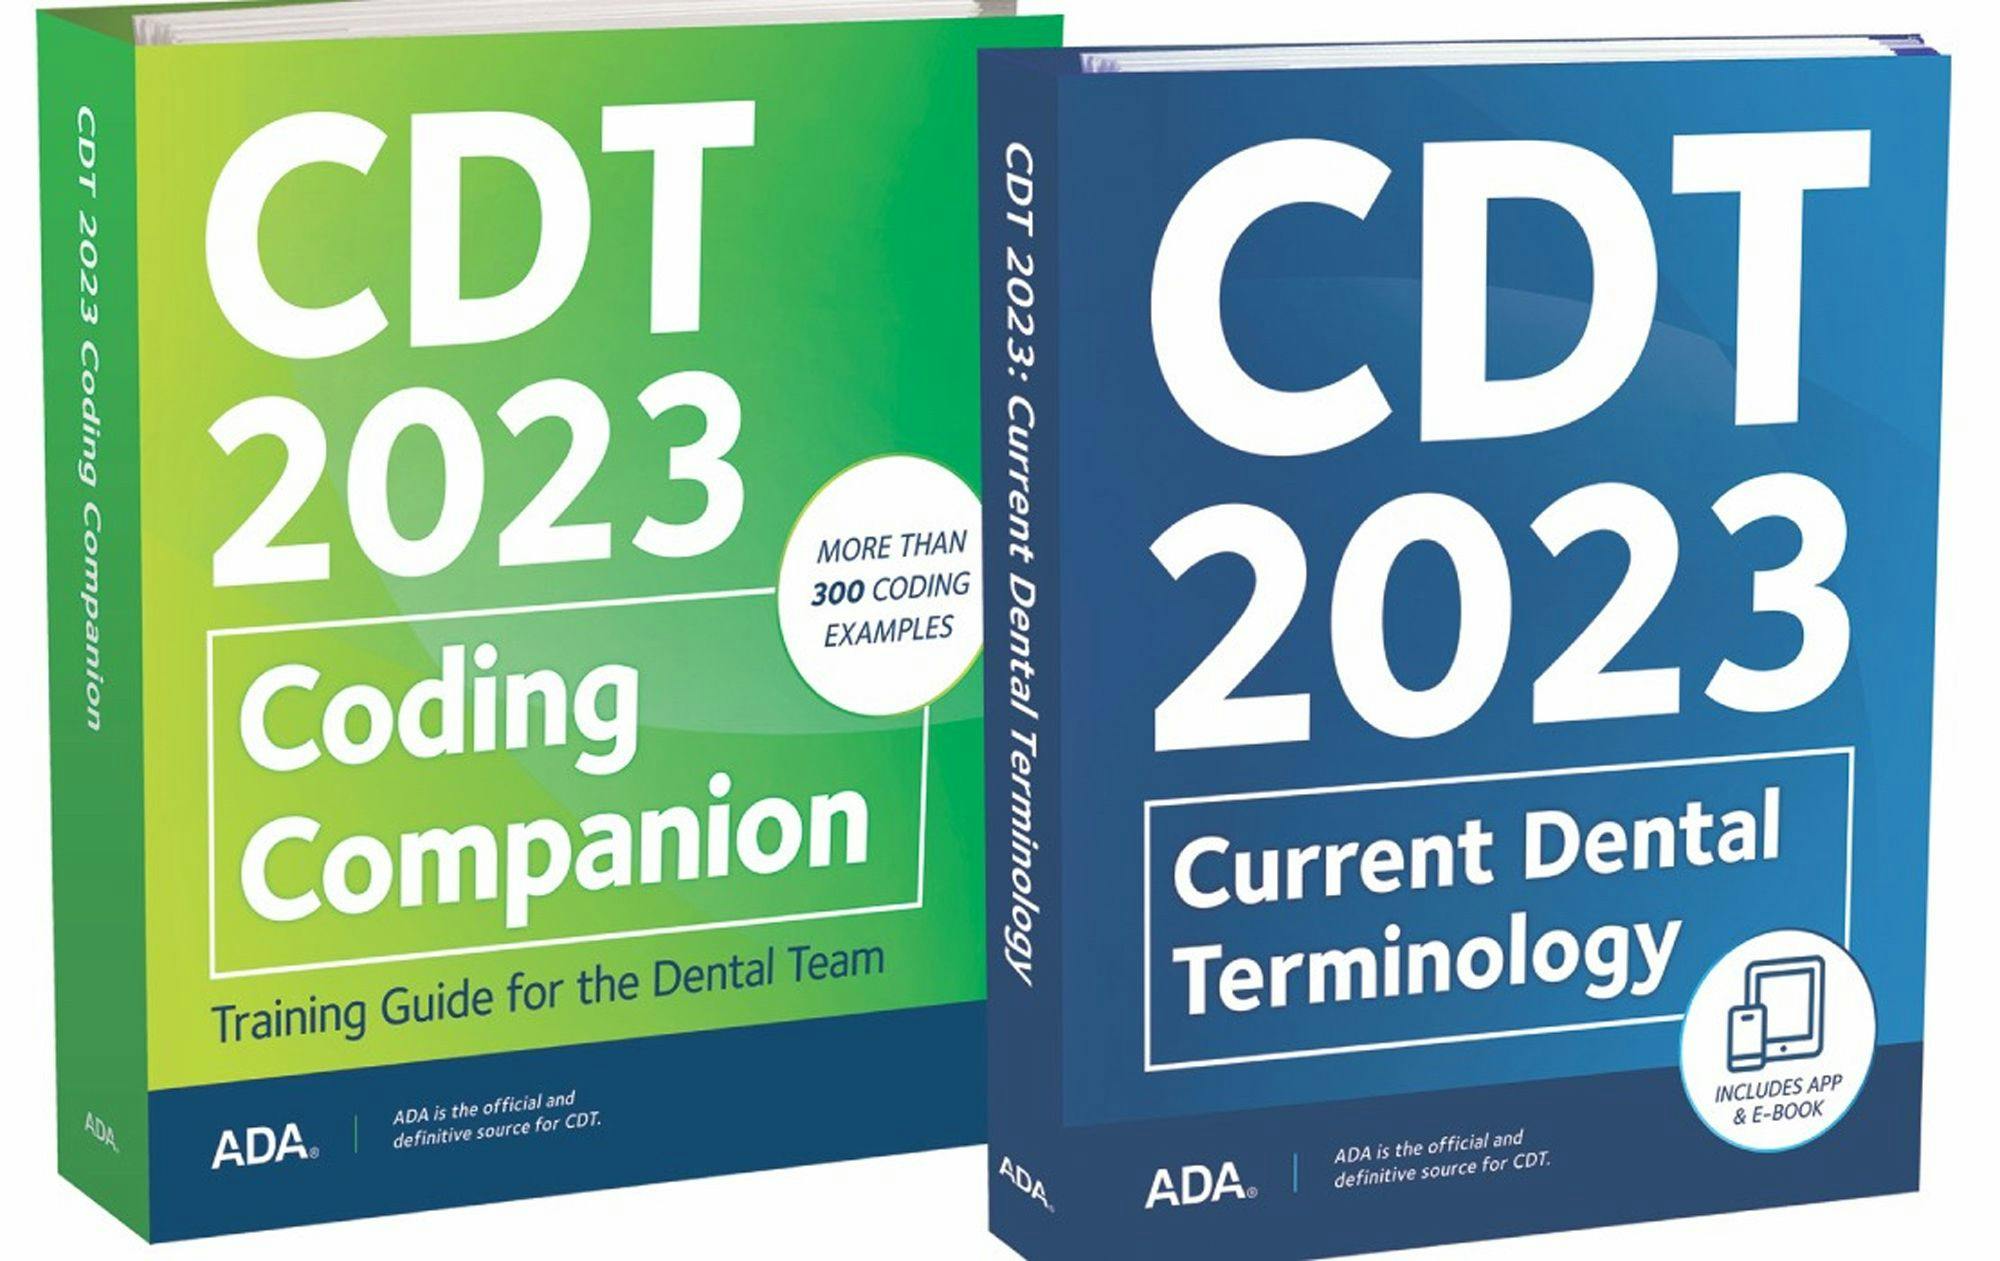 CDT 2023 and Coding Companion Now Available for Pre-Order